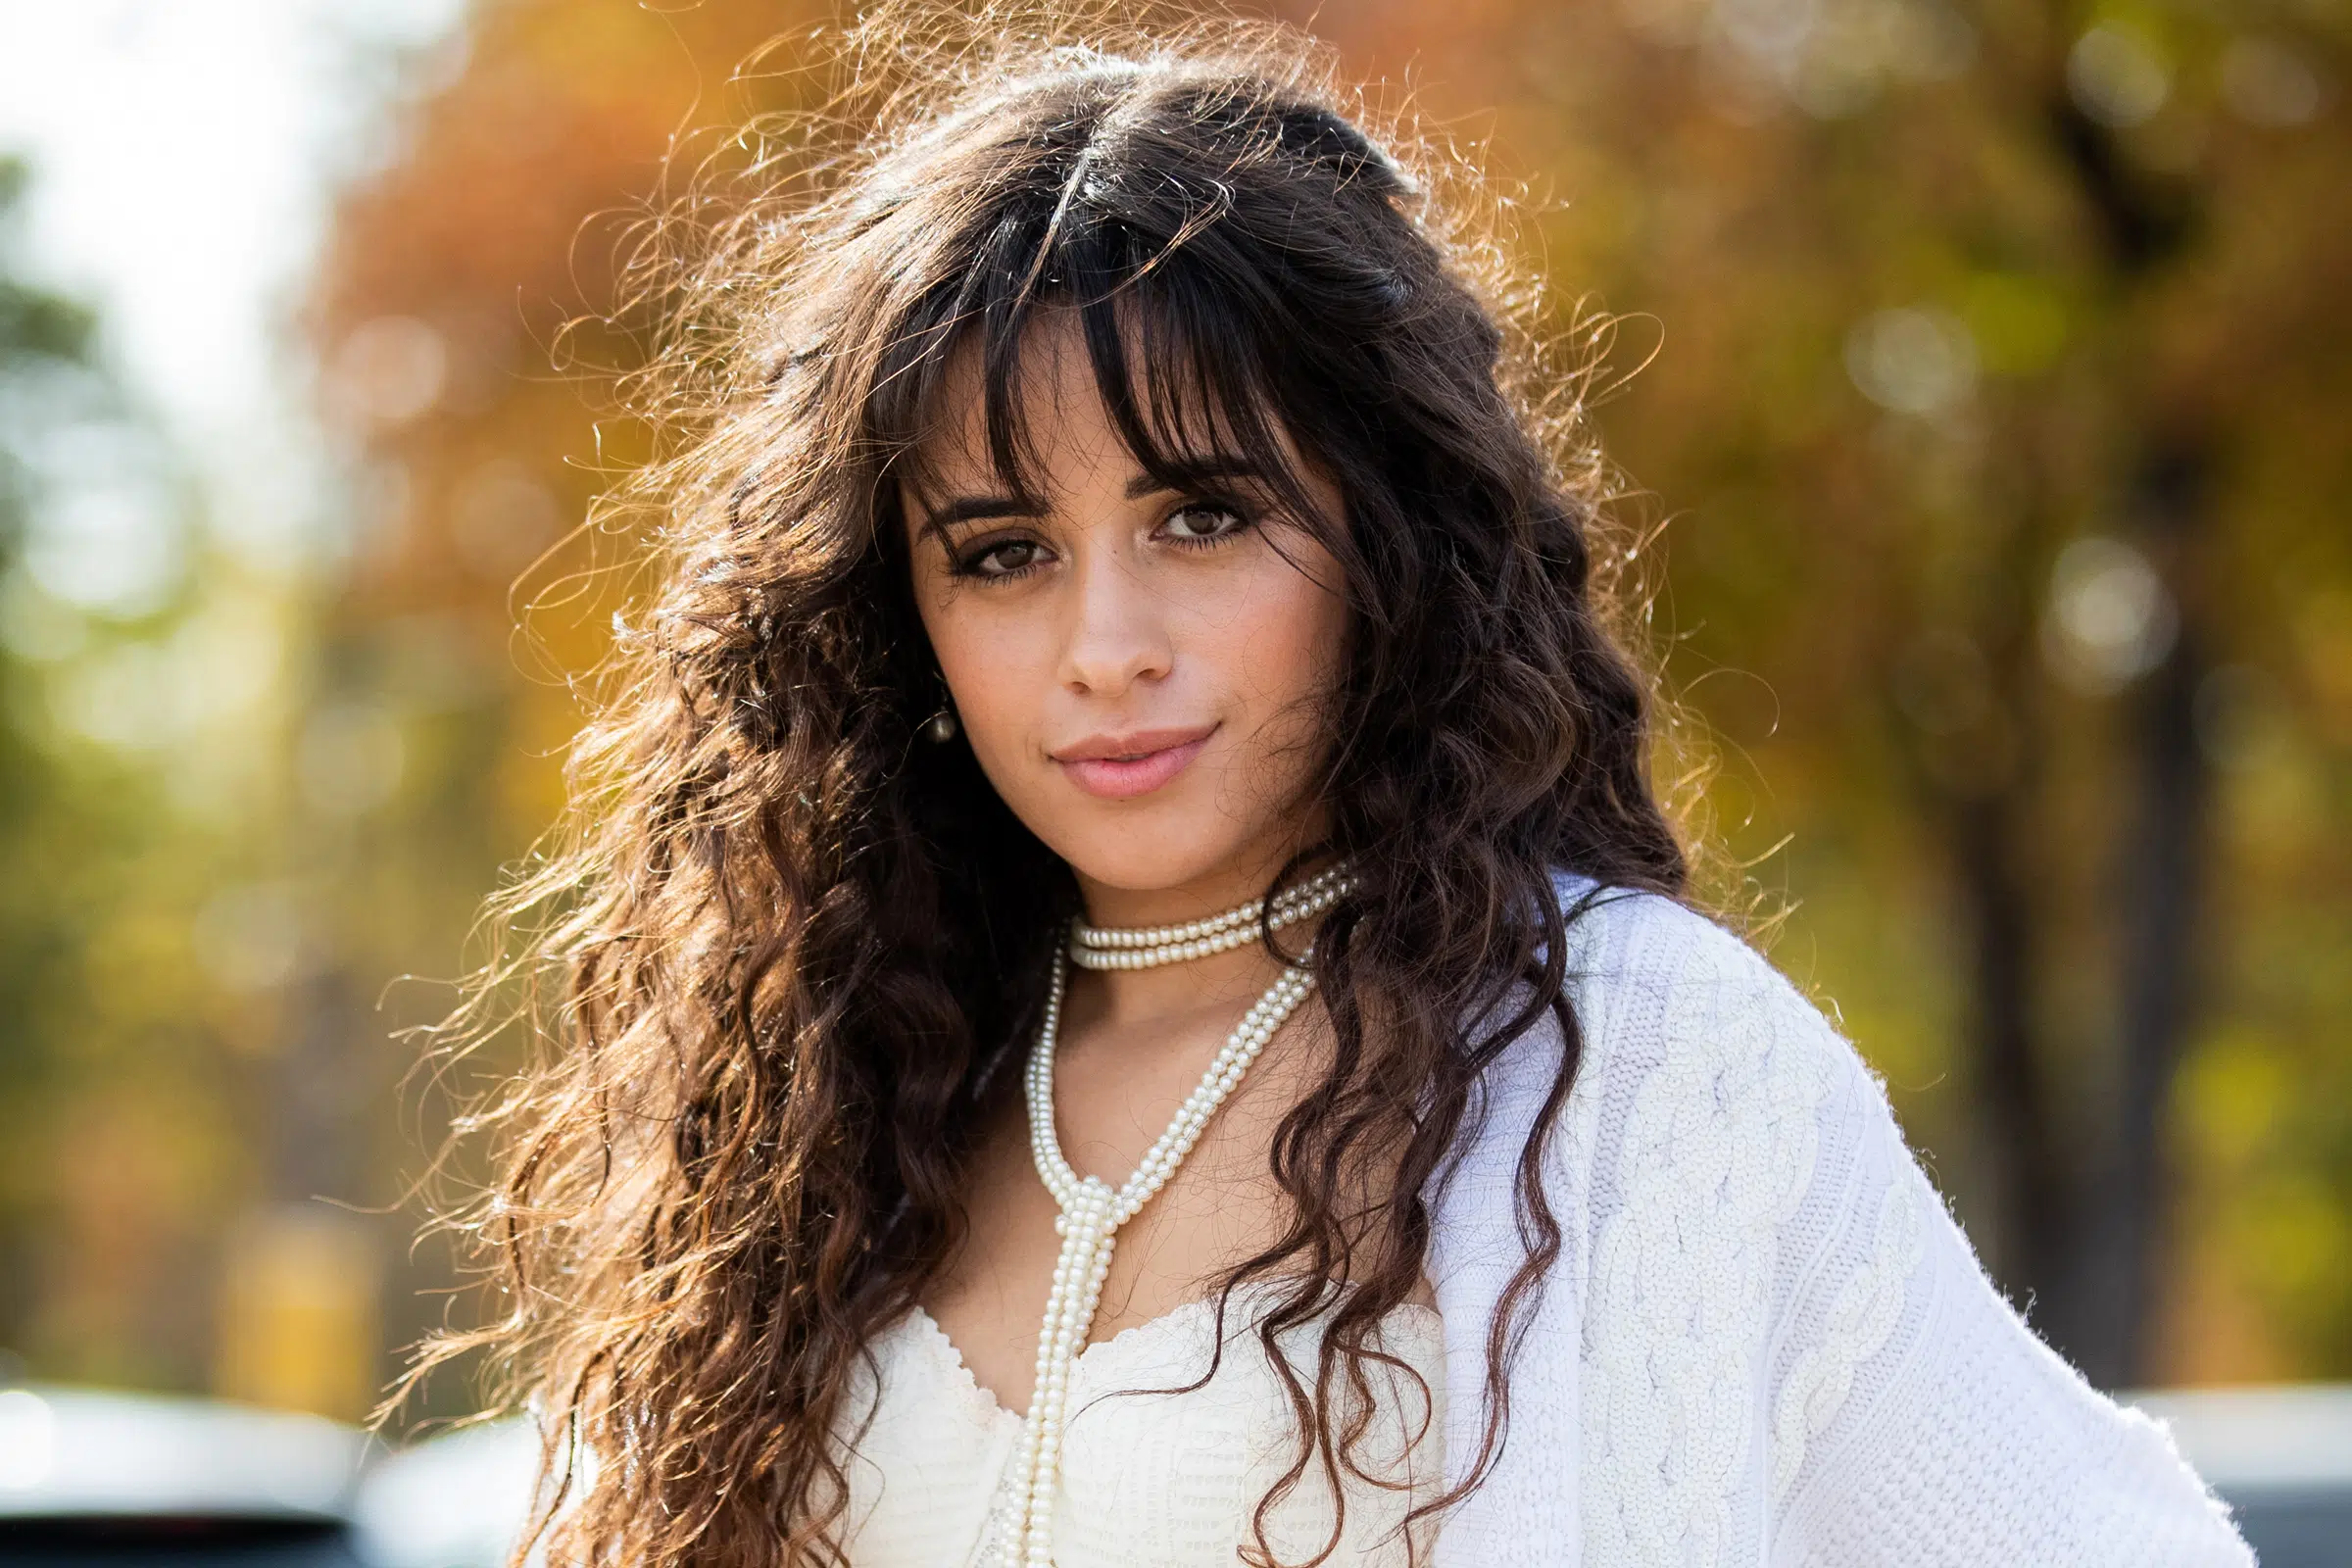 Camila Cabello Kicks Off Her 'Priceless Experience at Home'